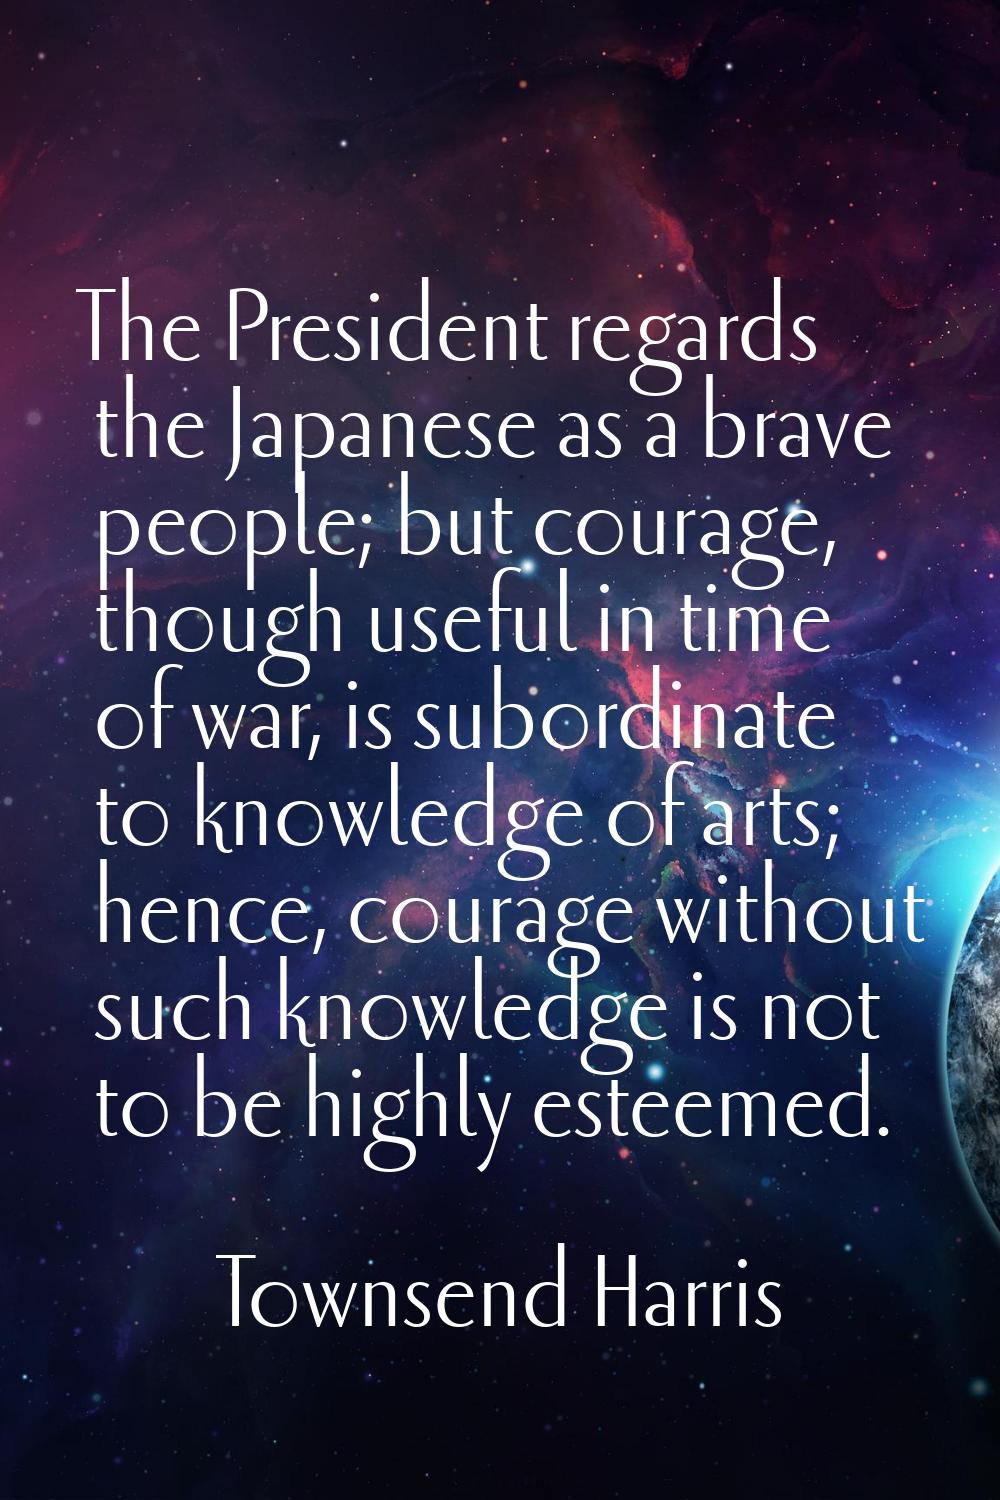 The President regards the Japanese as a brave people; but courage, though useful in time of war, is